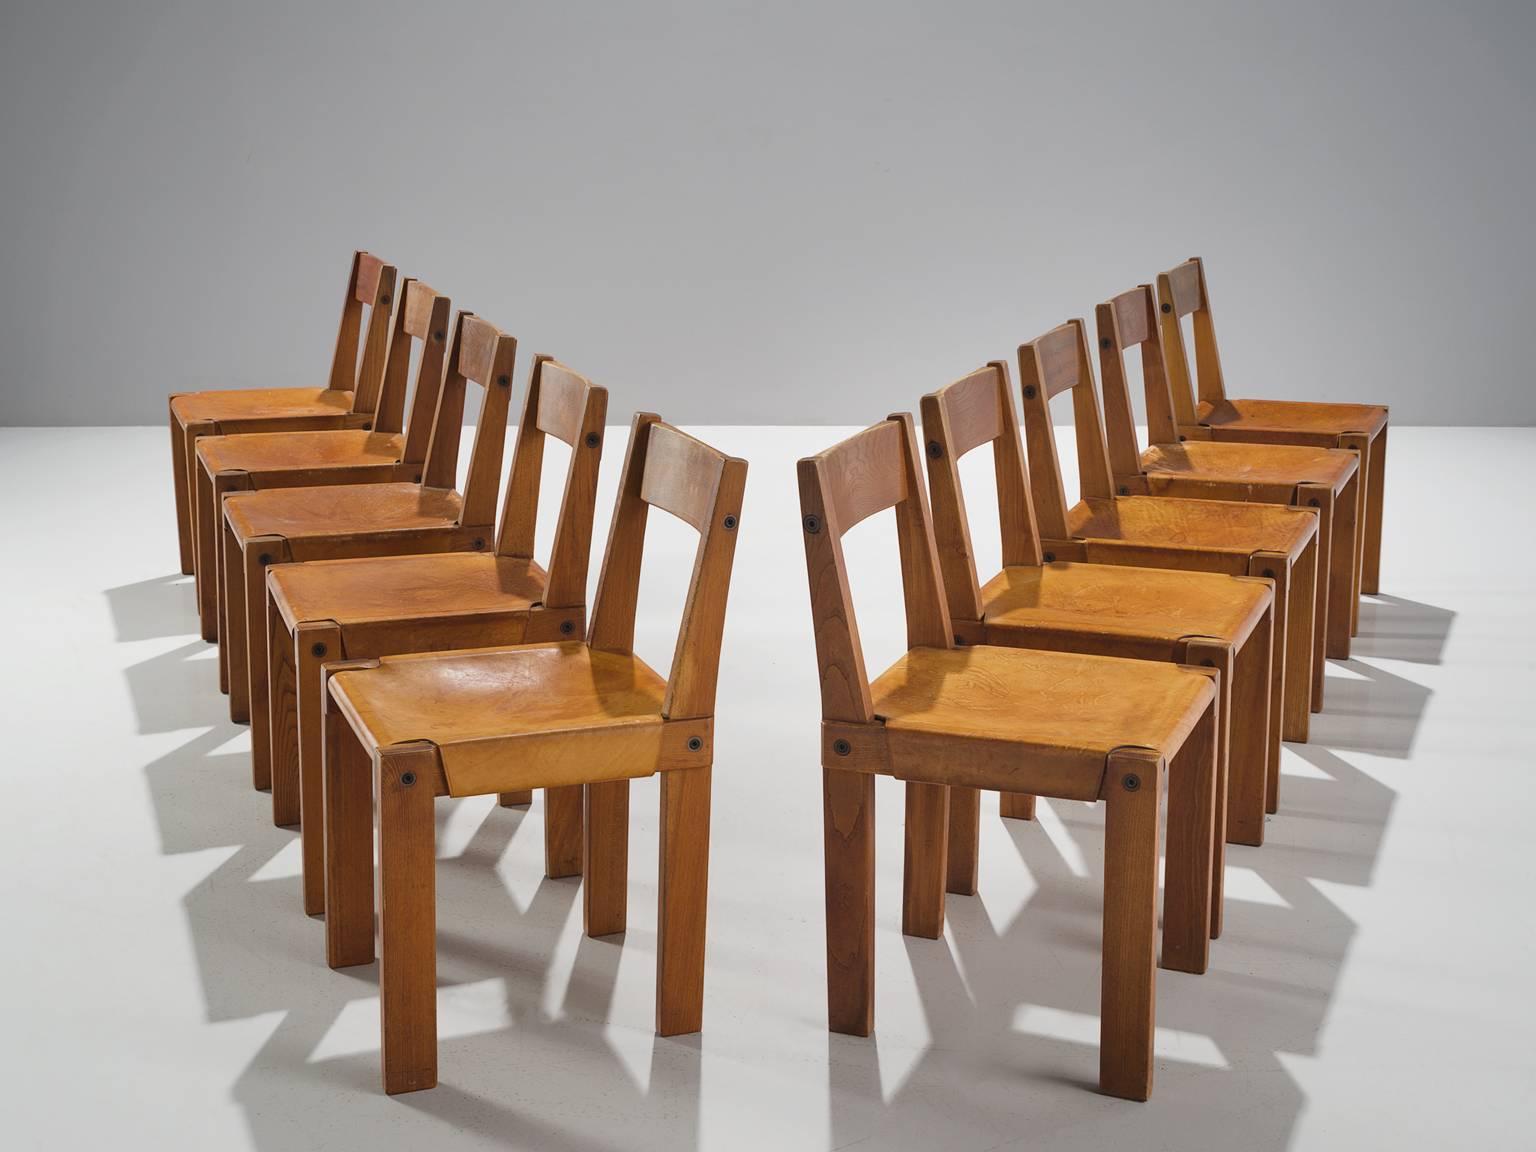 Pierre Chapo, set of ten chairs model S24, in elm and leather, France, 1960s.

Large set of ten dining chairs by French designer and carpenter Pierre Chapo. This chair was designed by Chapo for his friend Dr. Hiroshi Nakajima. The chairs consist